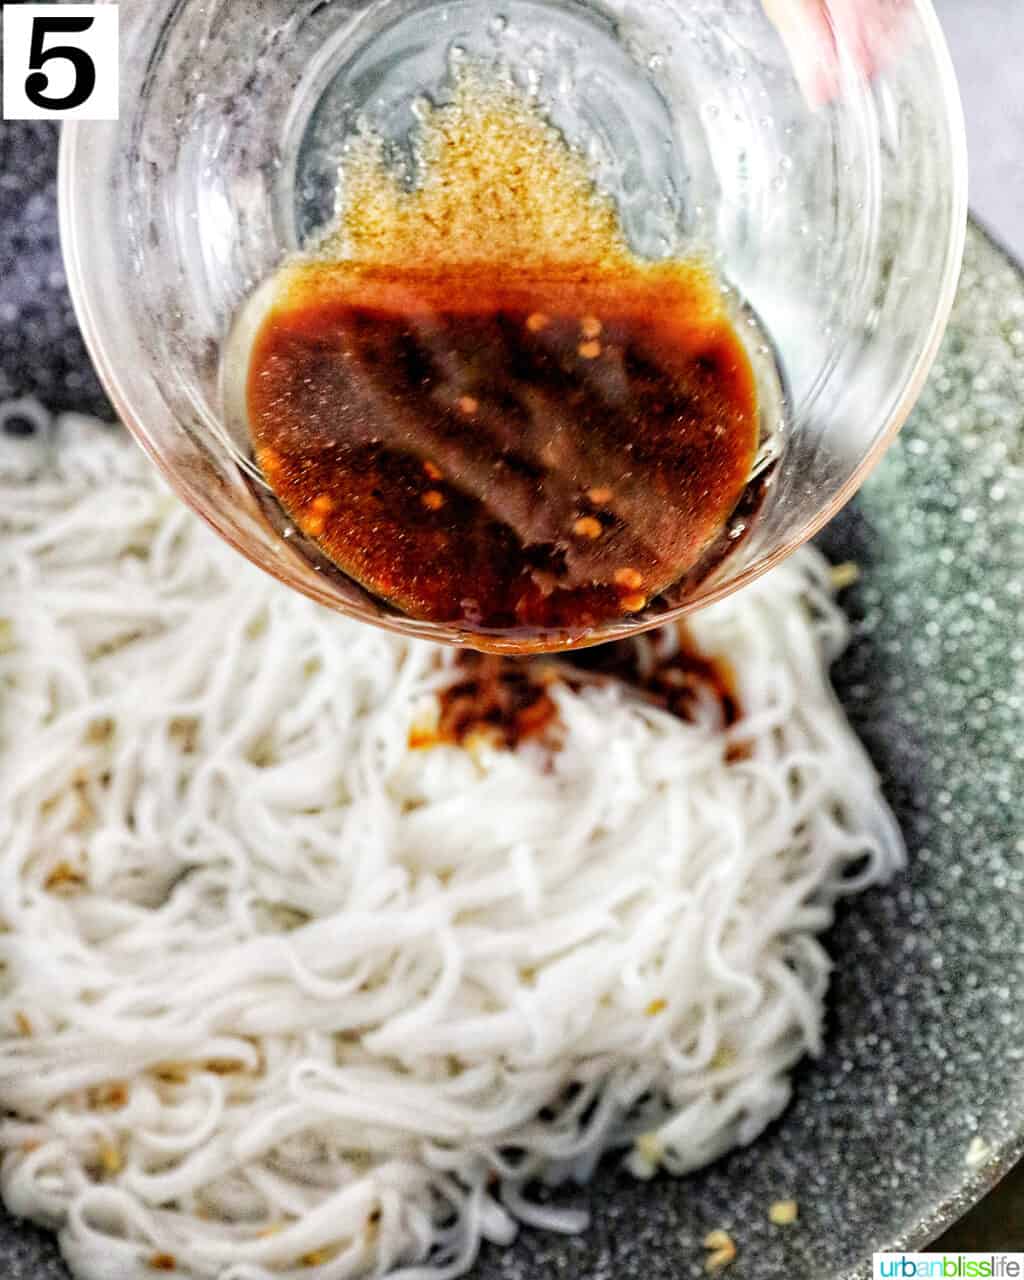 glass bowl of sauce over rice noodles in a wok.